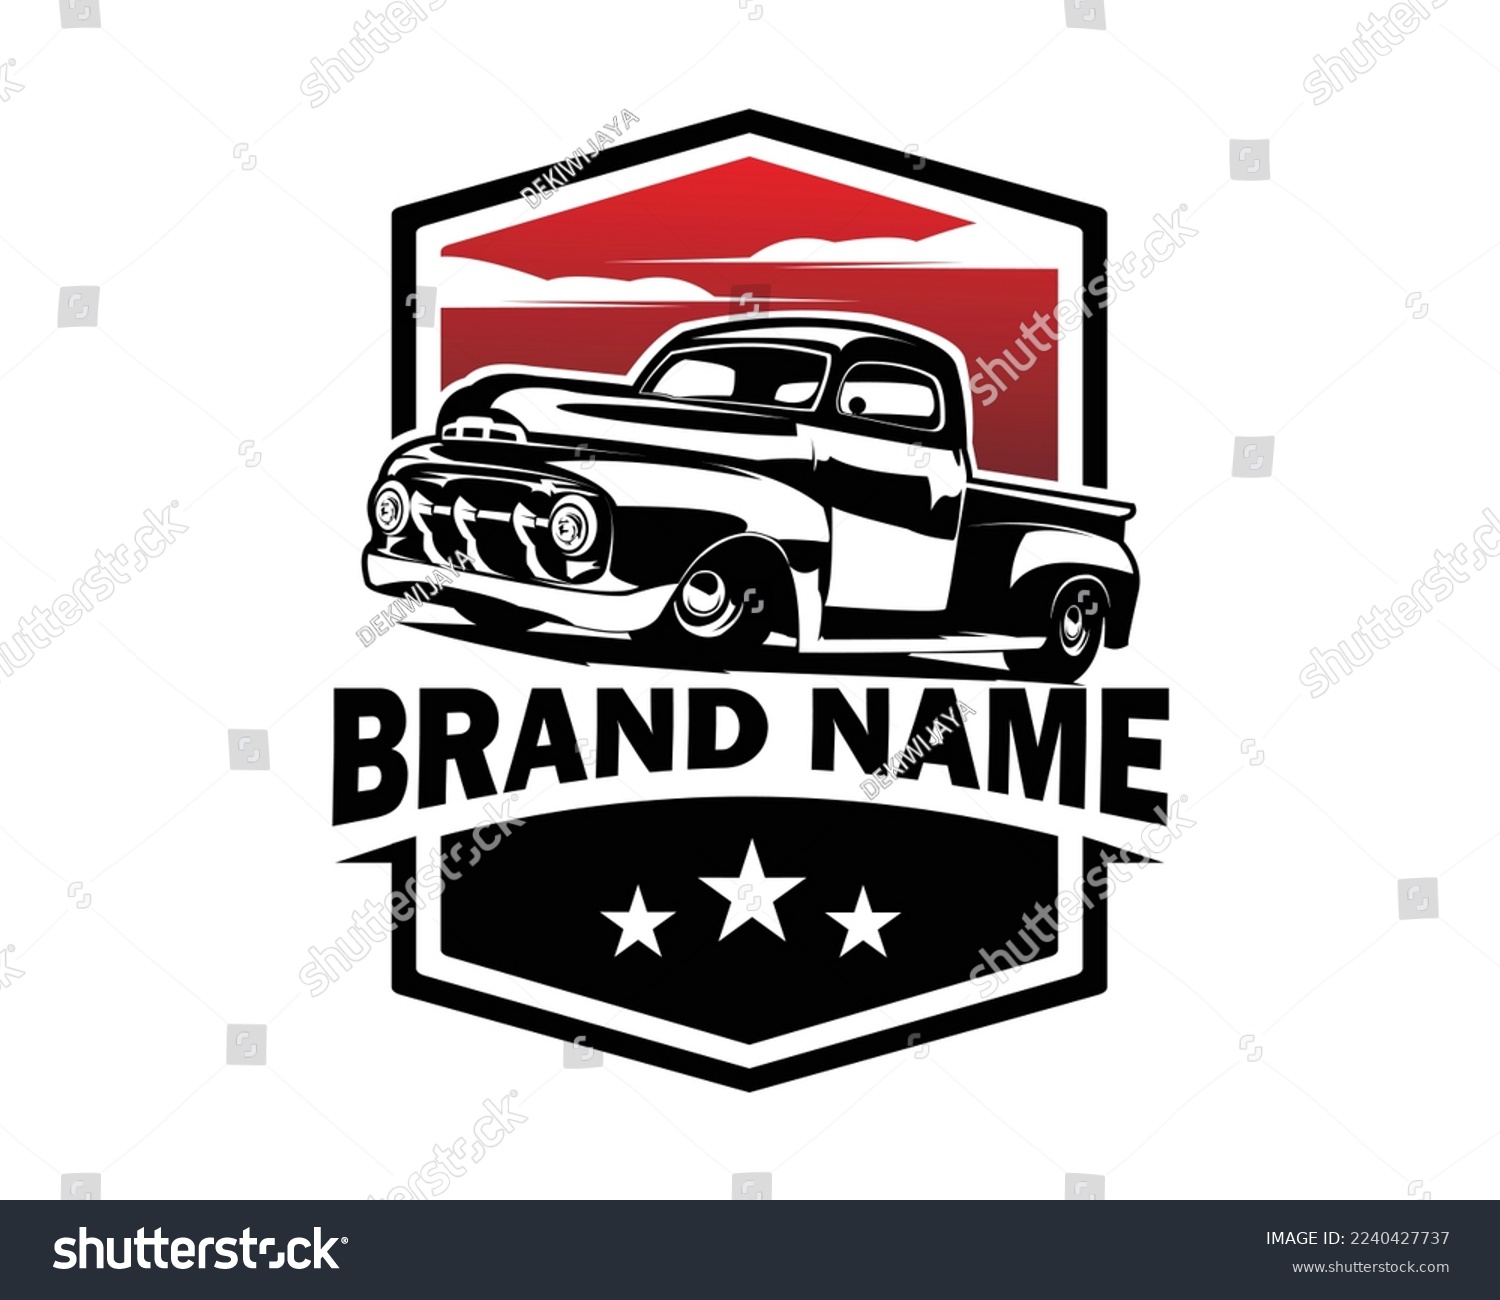 SVG of classic chevy truck vector view with sunset view on white background view from side. Best for logos, badges, emblems, classic truck industry. vector illustration in eps 10. svg